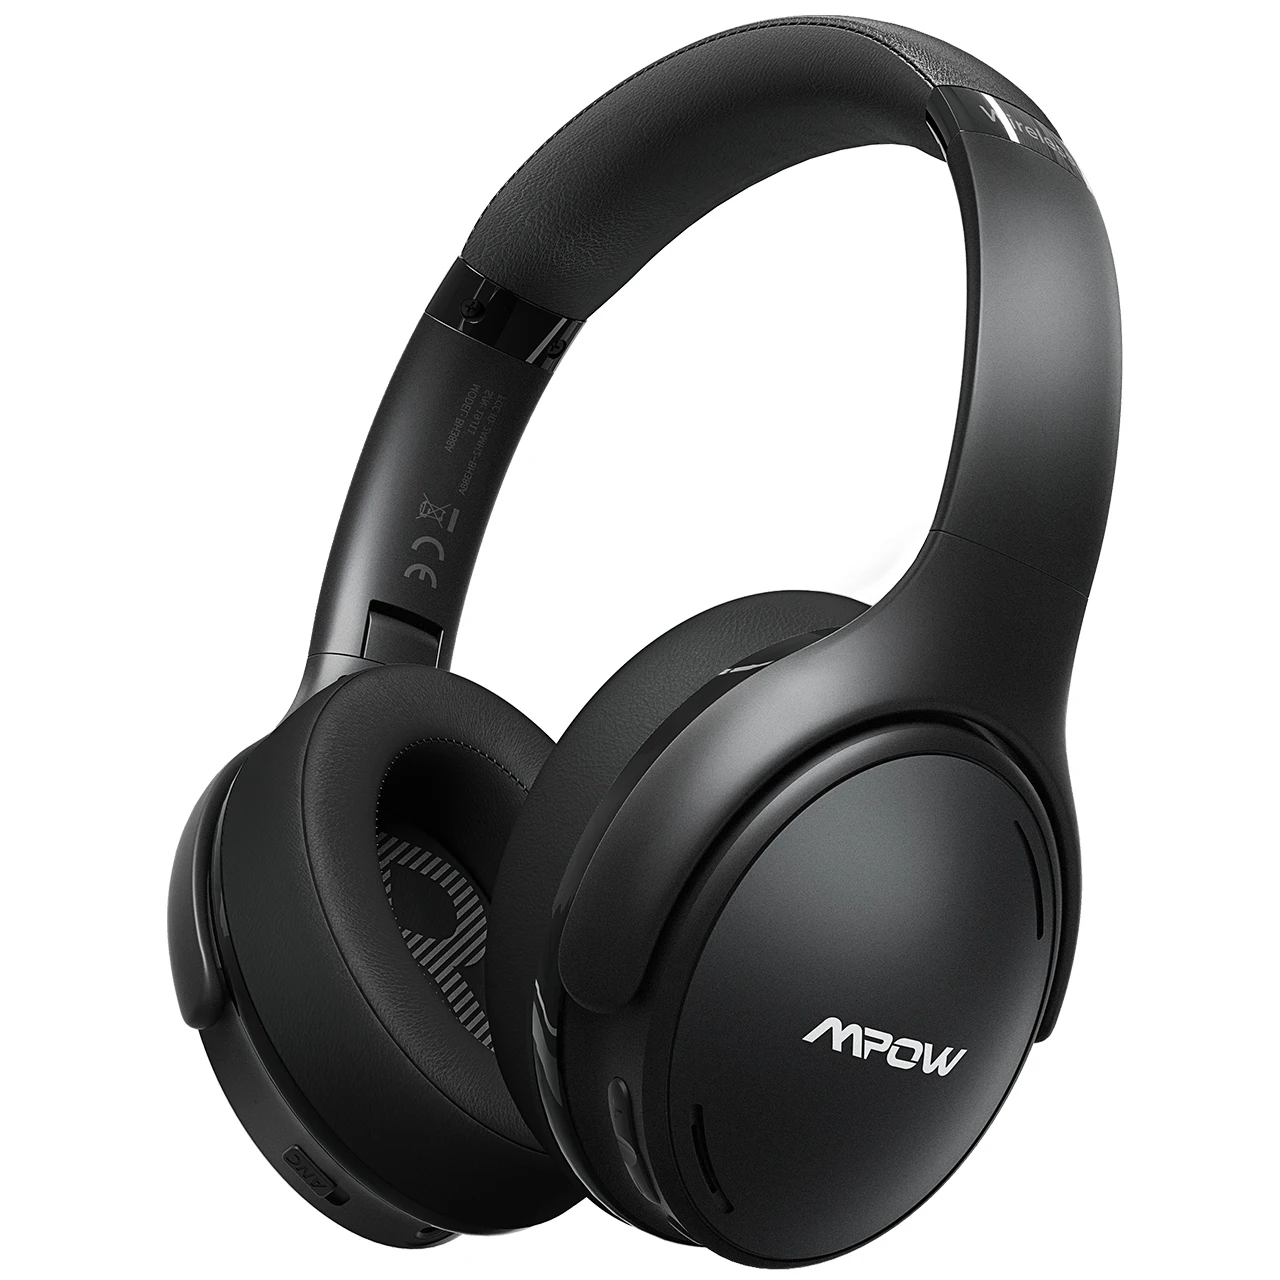 Mpow h19 ipo bluetooth 5.0 active noise cancelling headphones lightweight wireless headset cvc 8.0 mic 30hrs playing fast charge